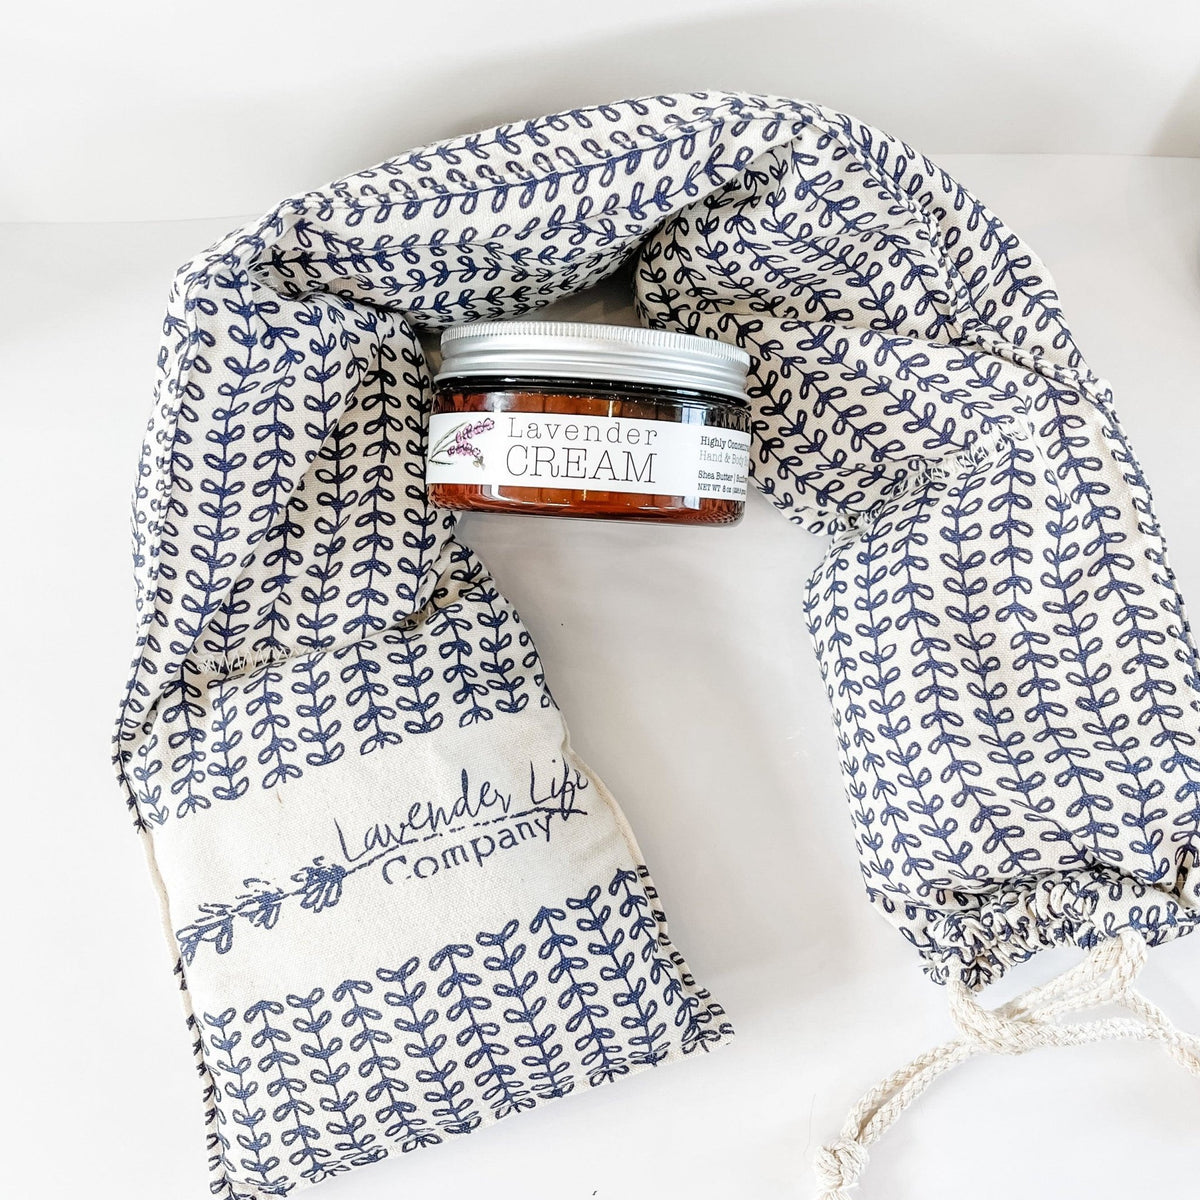 Lavender Neck Wrap & Lotion - Relax Gift Set - Lavender Life Company